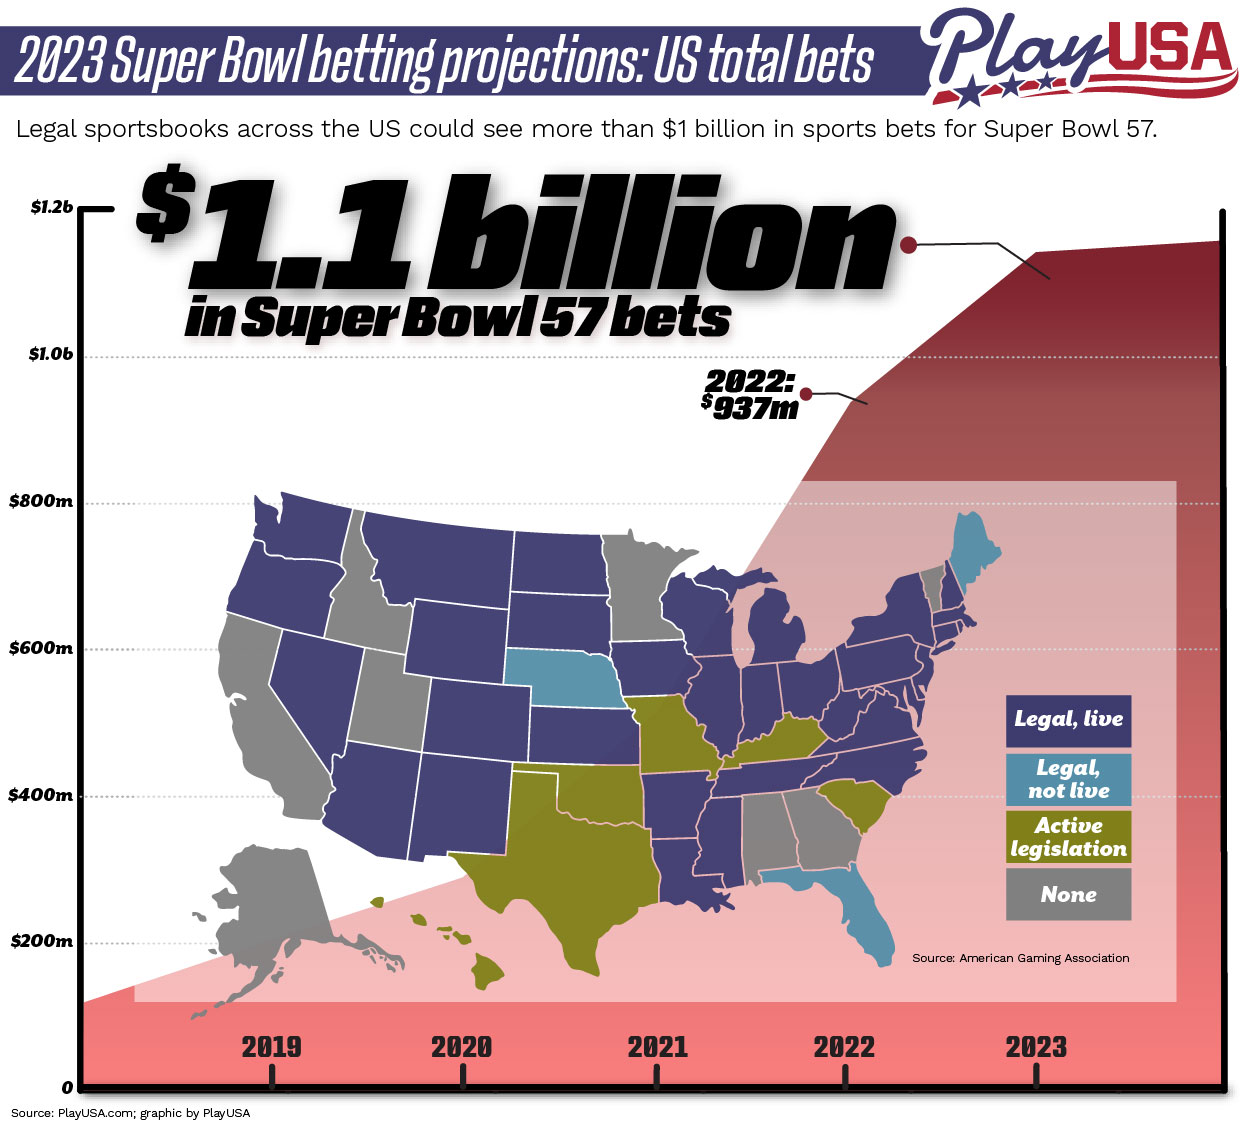 play usa super bowl betting projections 2023 infographic